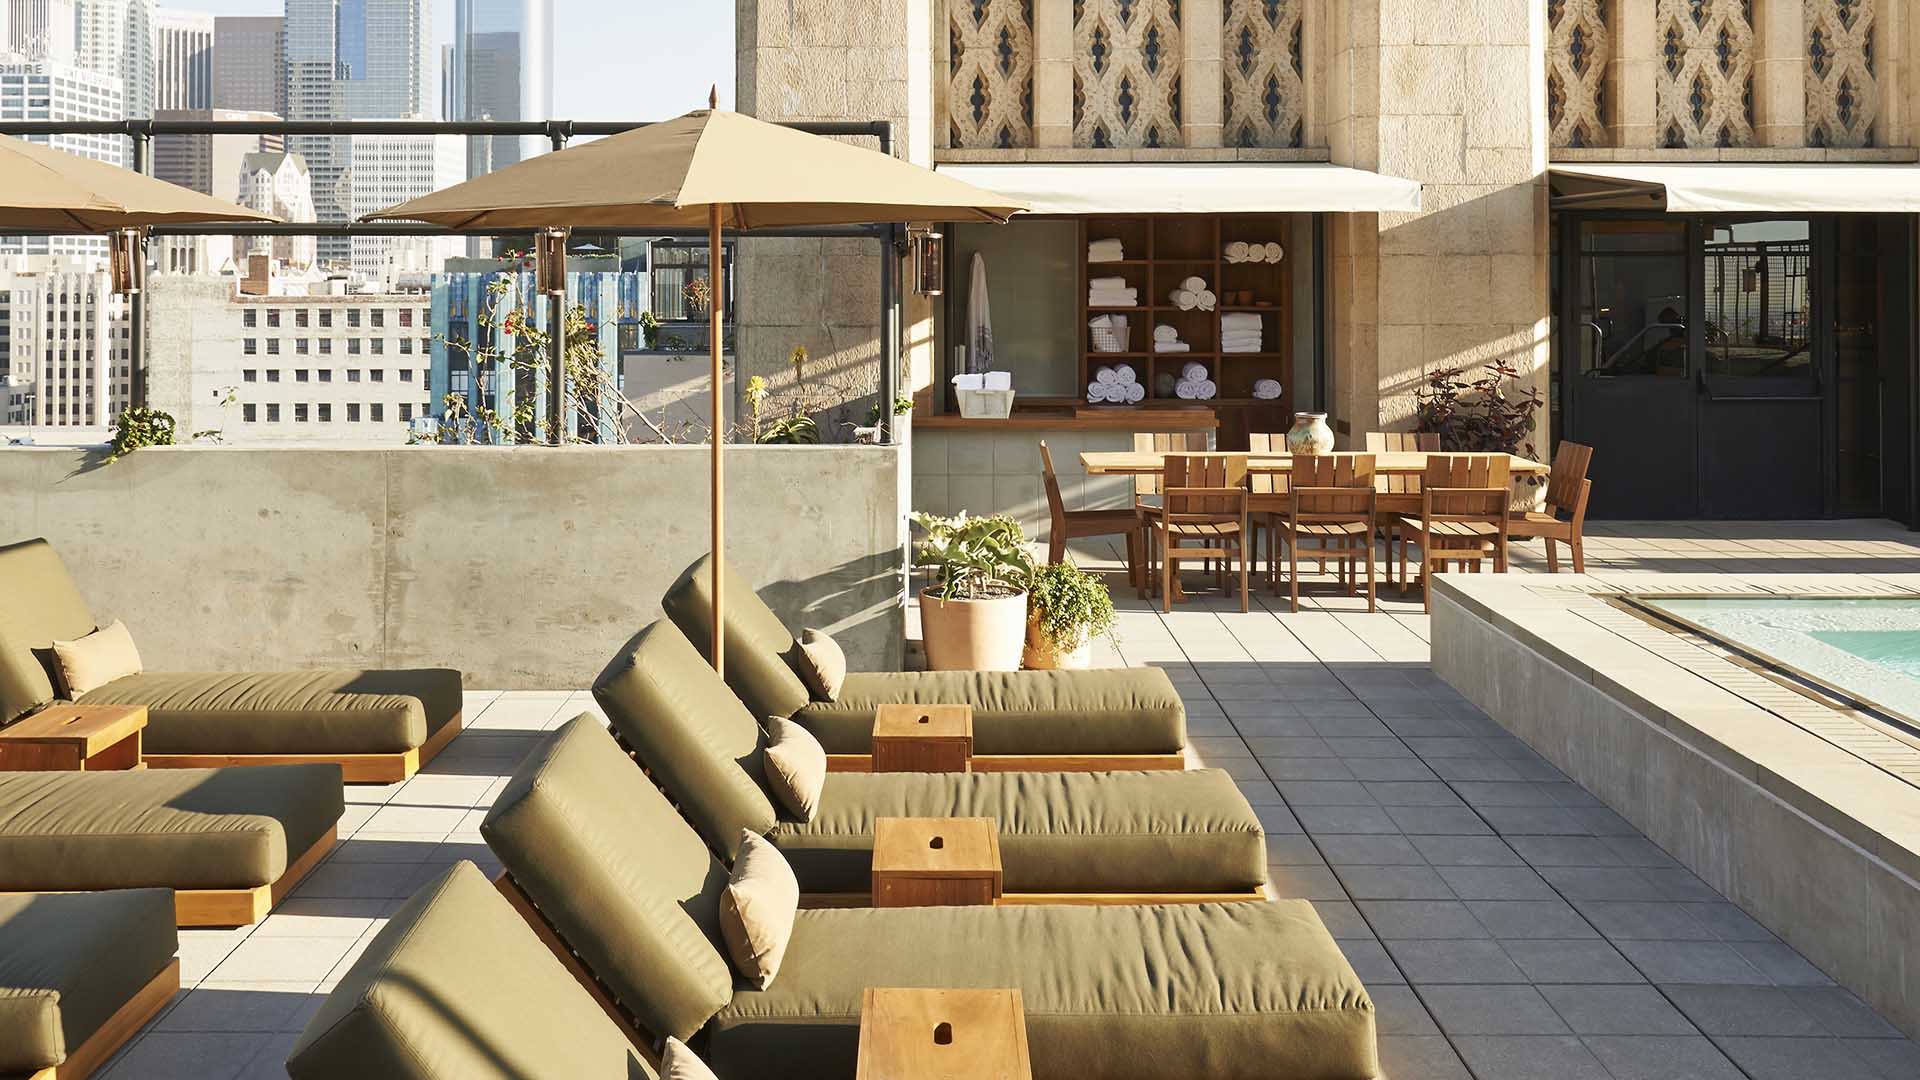 Stylish US Chain Ace Hotel Is Opening Its First Australian Outpost in Sydney